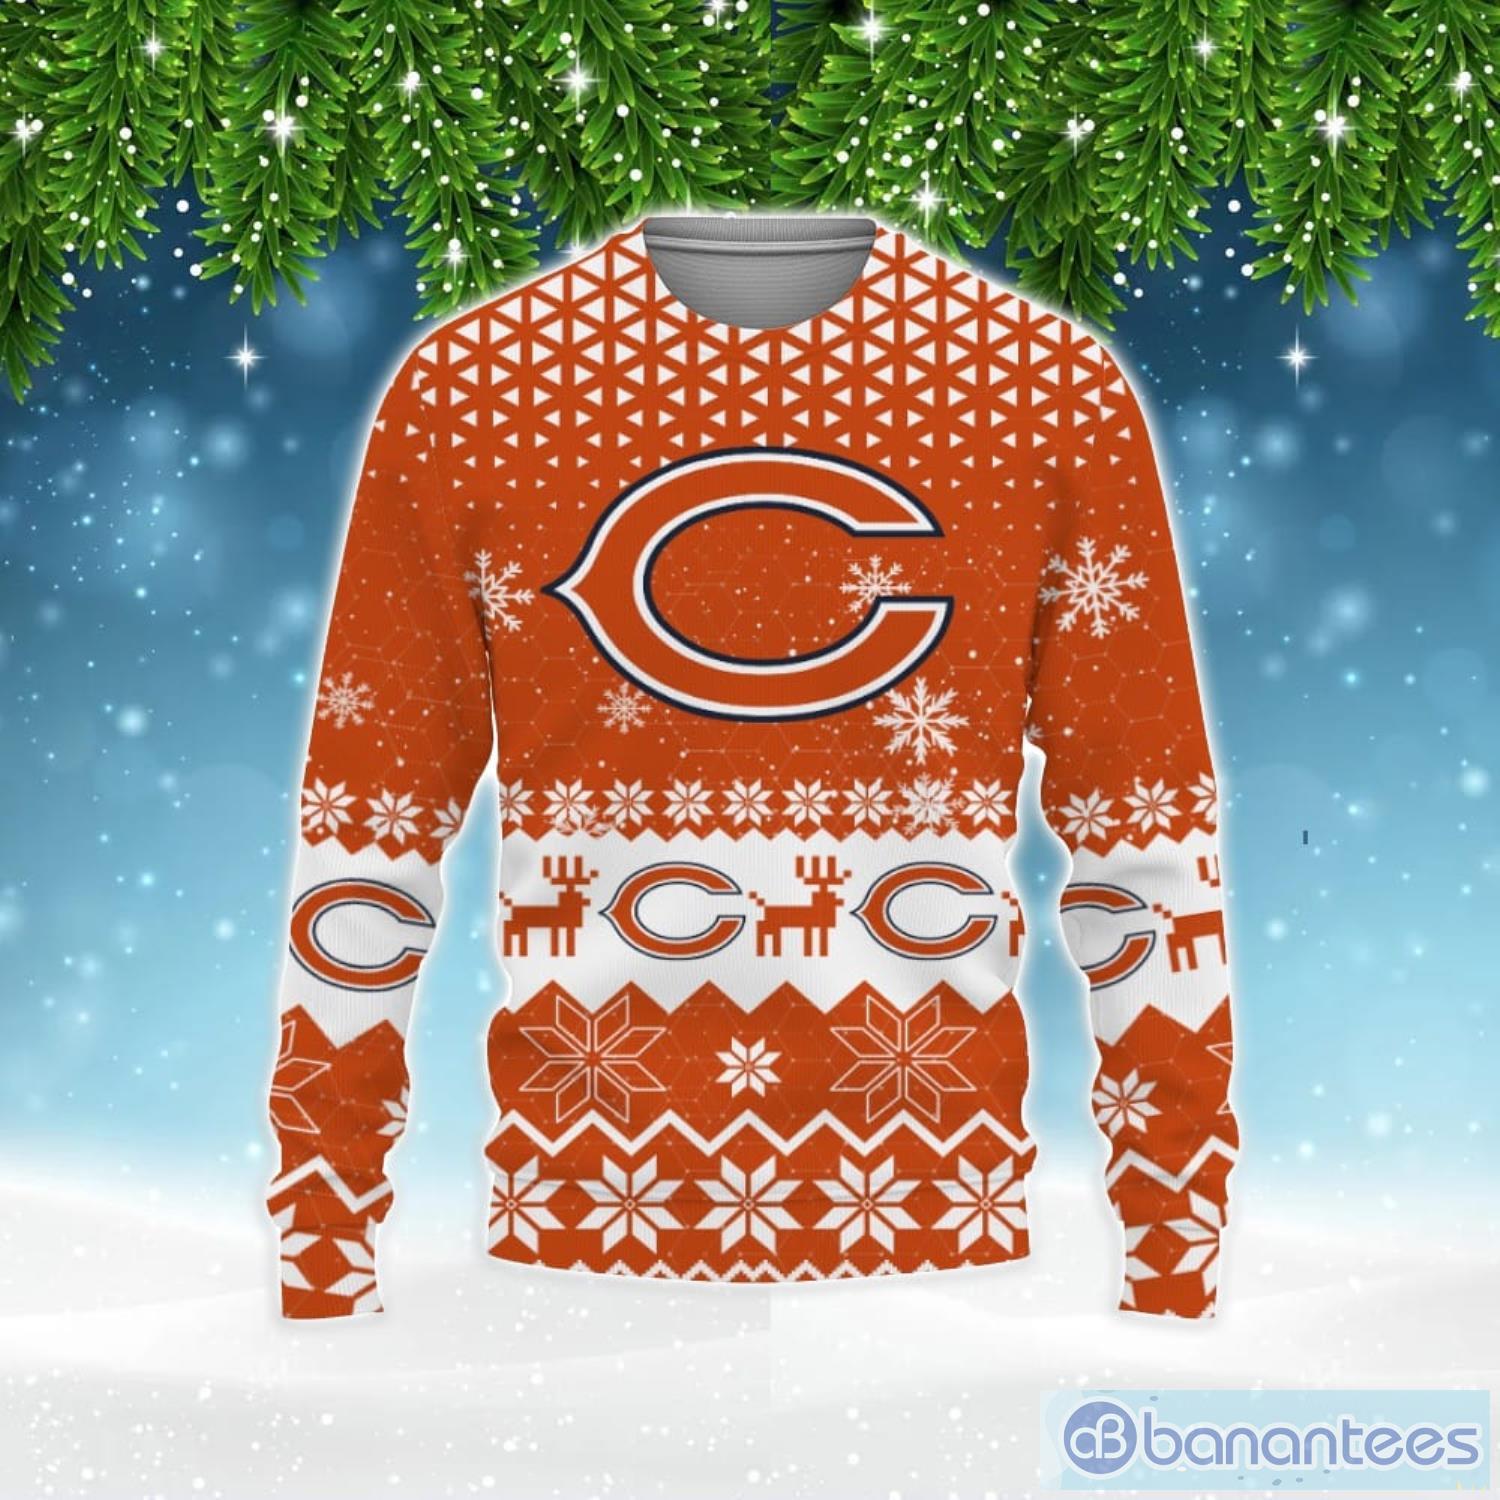 Chicago Bears Ugly Sweater Chicago Bears Football Ugly Christmas Sweater